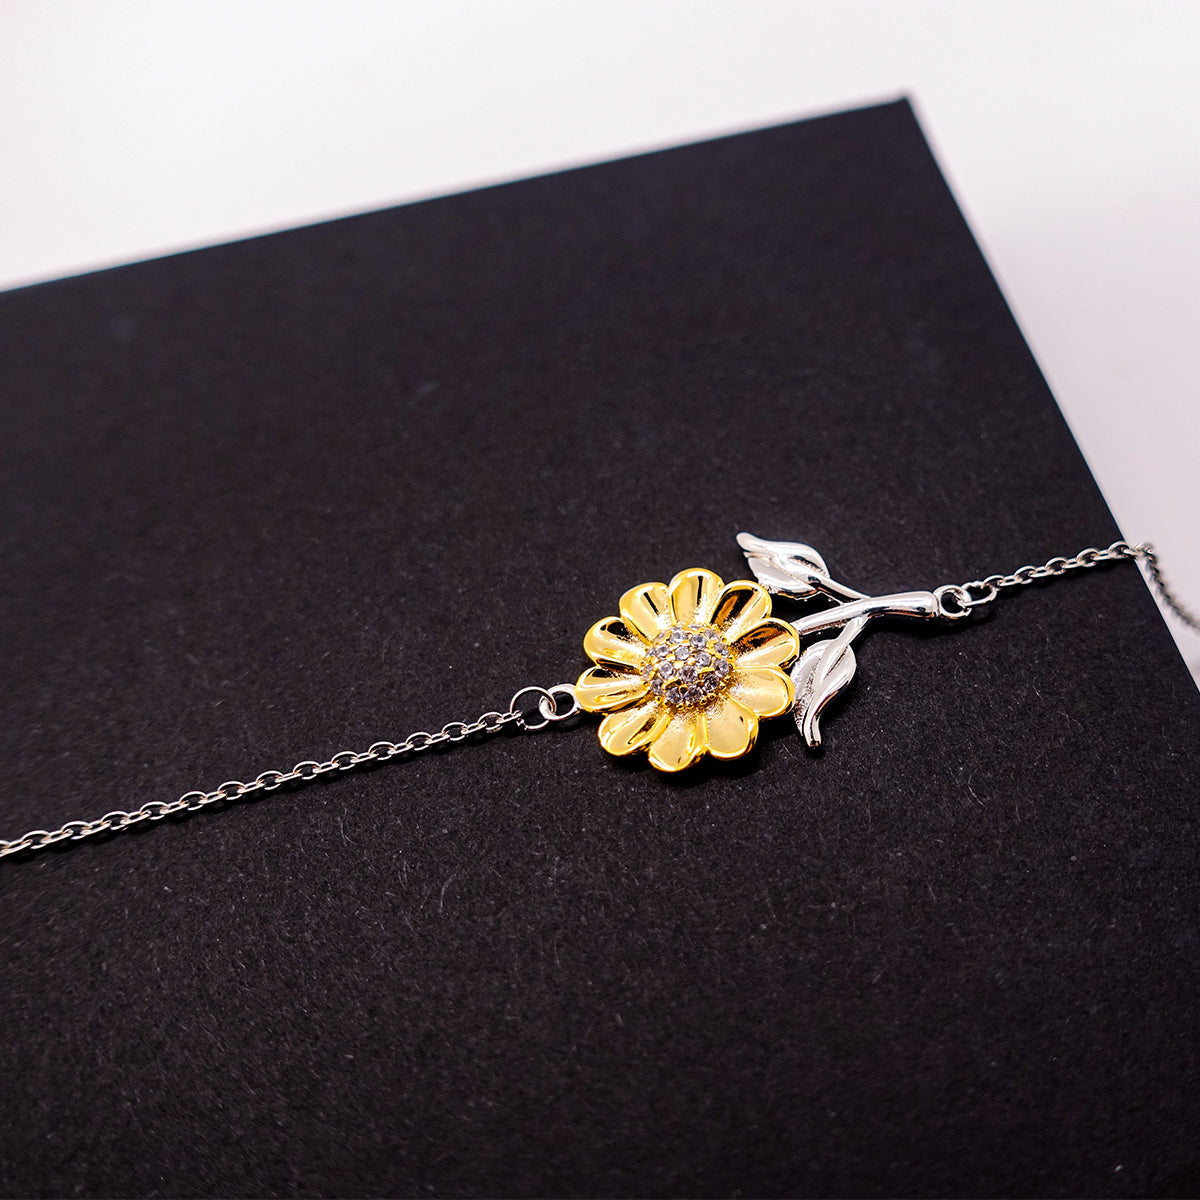 Sunflower Bracelet for Nephew - Perfect Love Casteth Out Fear - Inspirational Gift for Birthday, Christmas, and Graduation - Engraved Confidence and Hope for Nephew